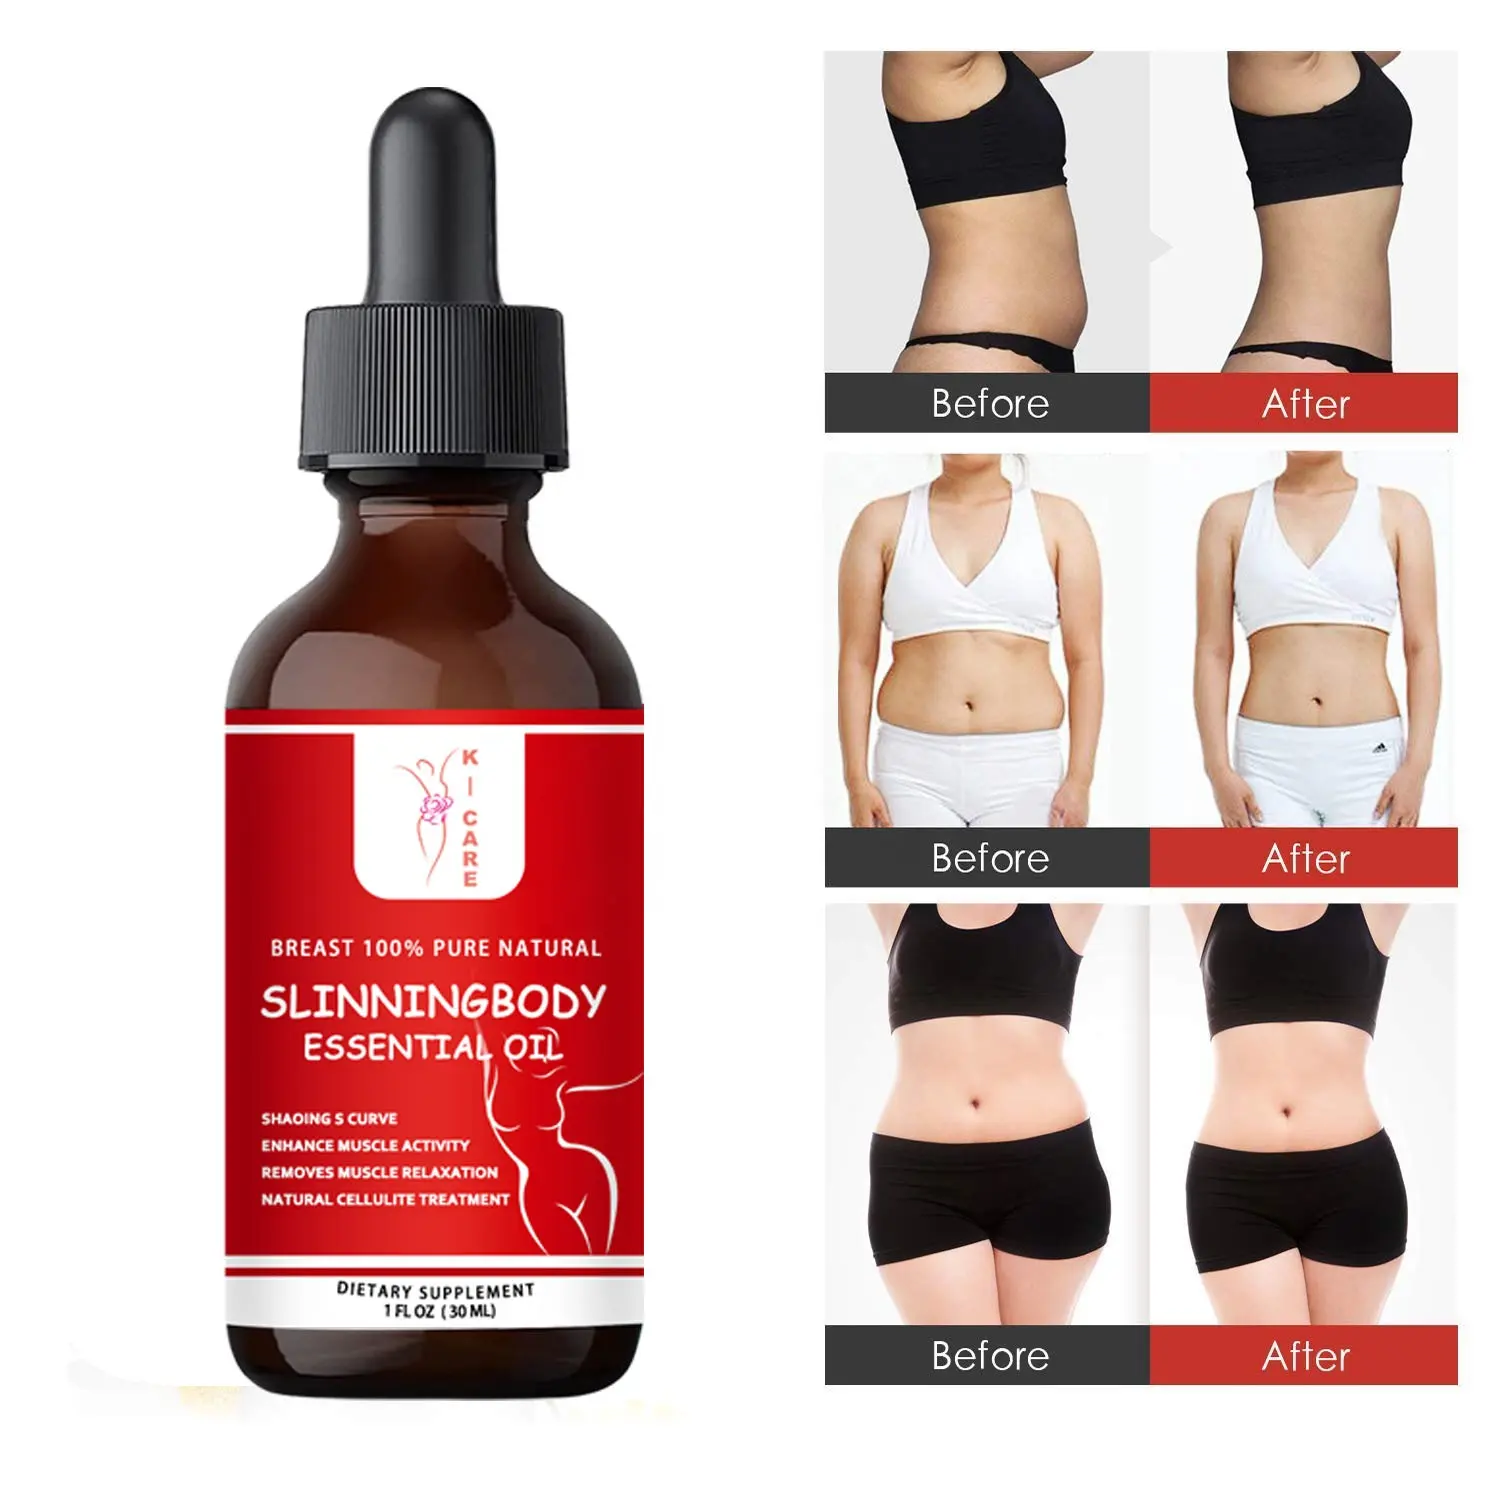 Hot oil Professional Cellulite Slimming & Firming oil Fat Burning Shape the Perfect Figure of Tummy Waist and Legs OEM